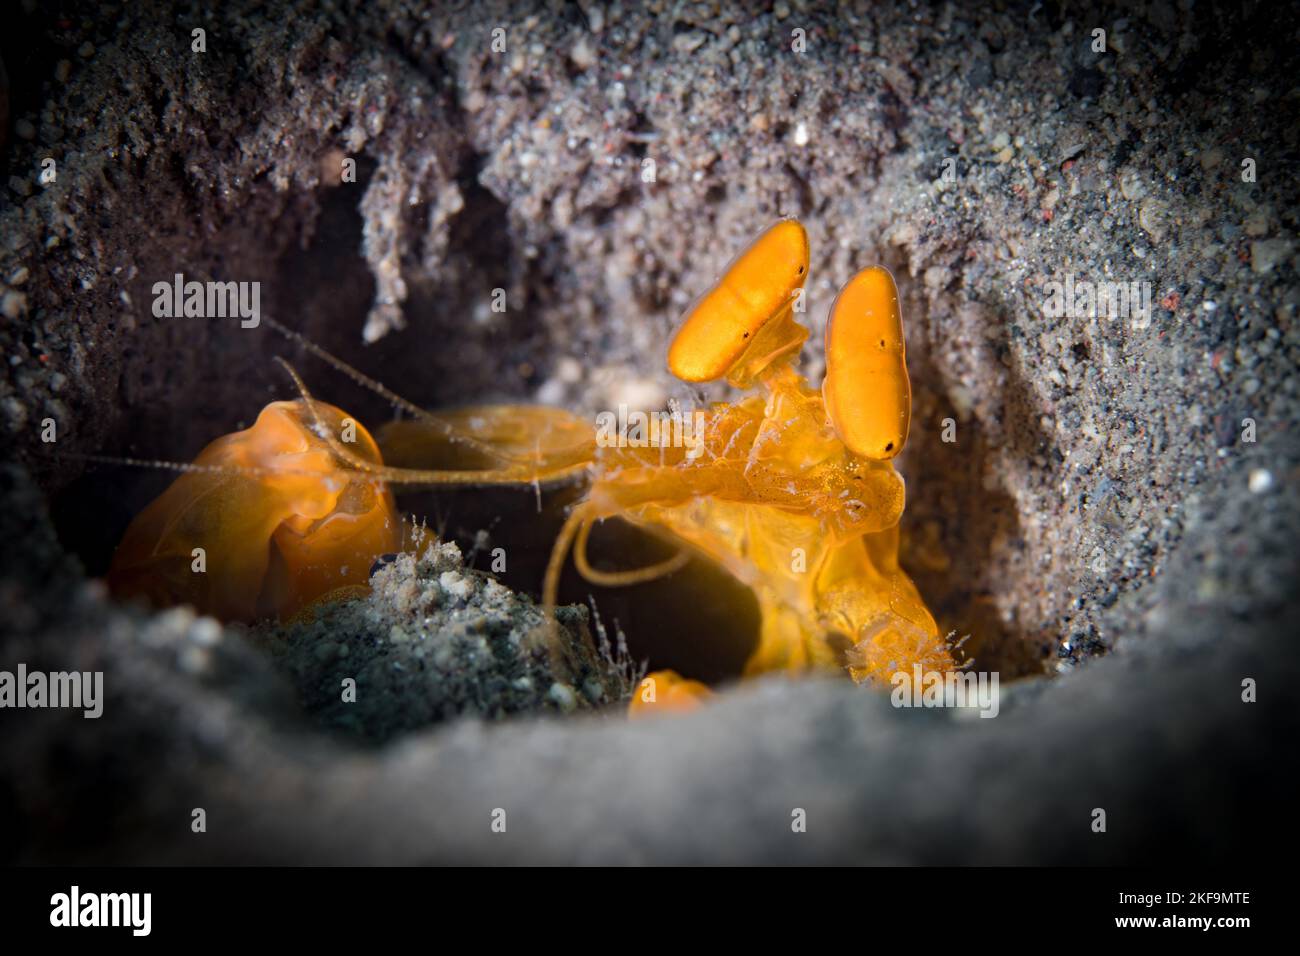 Spearing mantis shrimp gazes out from edge of its hole Stock Photo